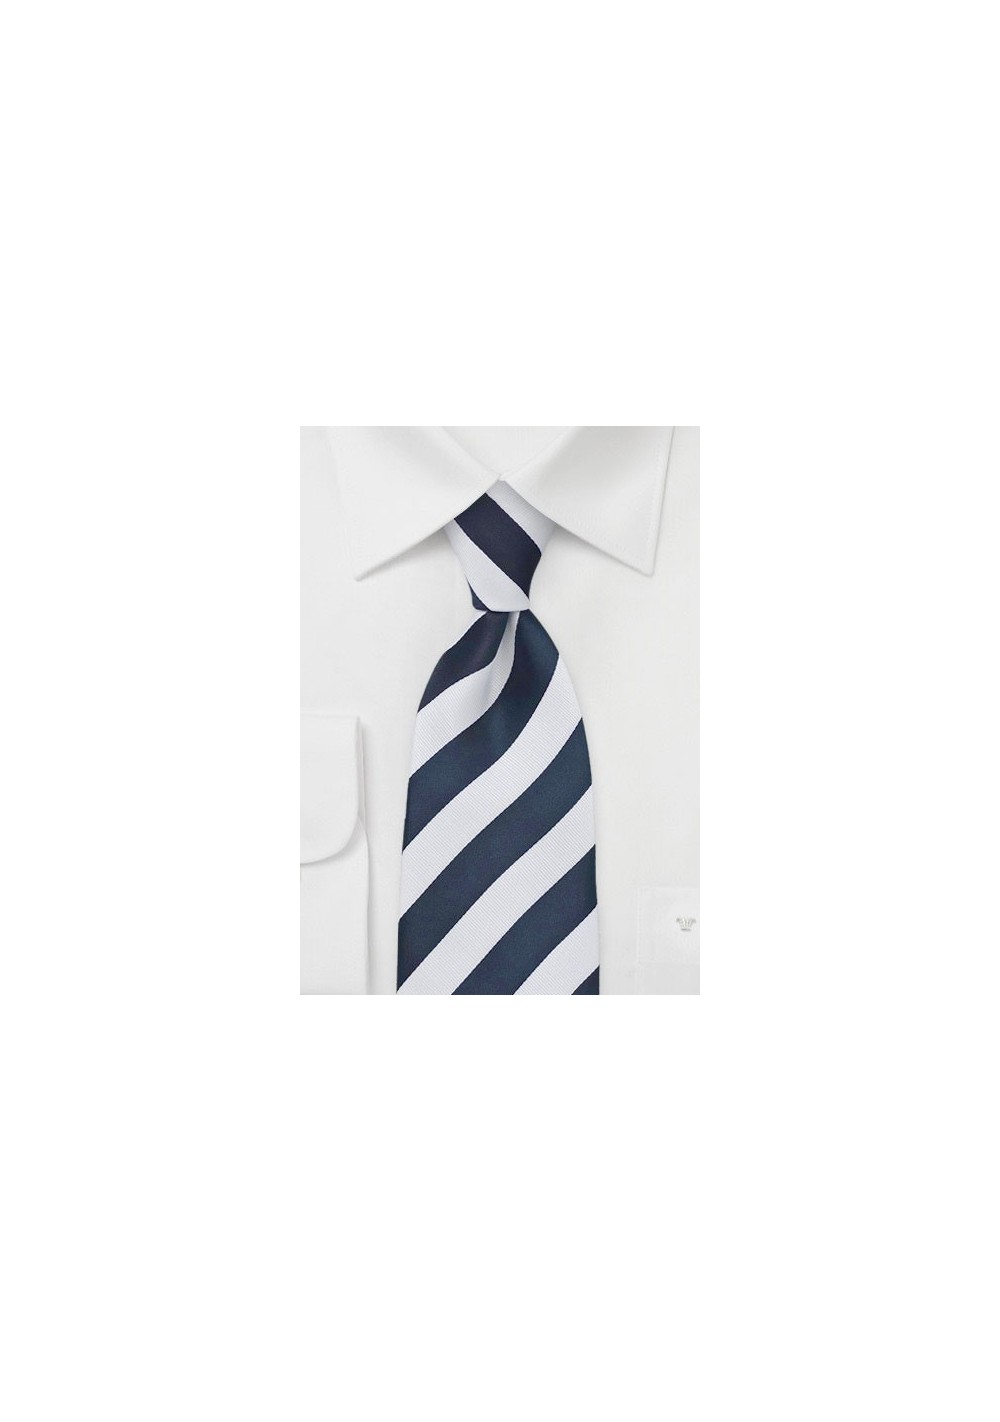 Classic Striped Tie in Dark Navy and White